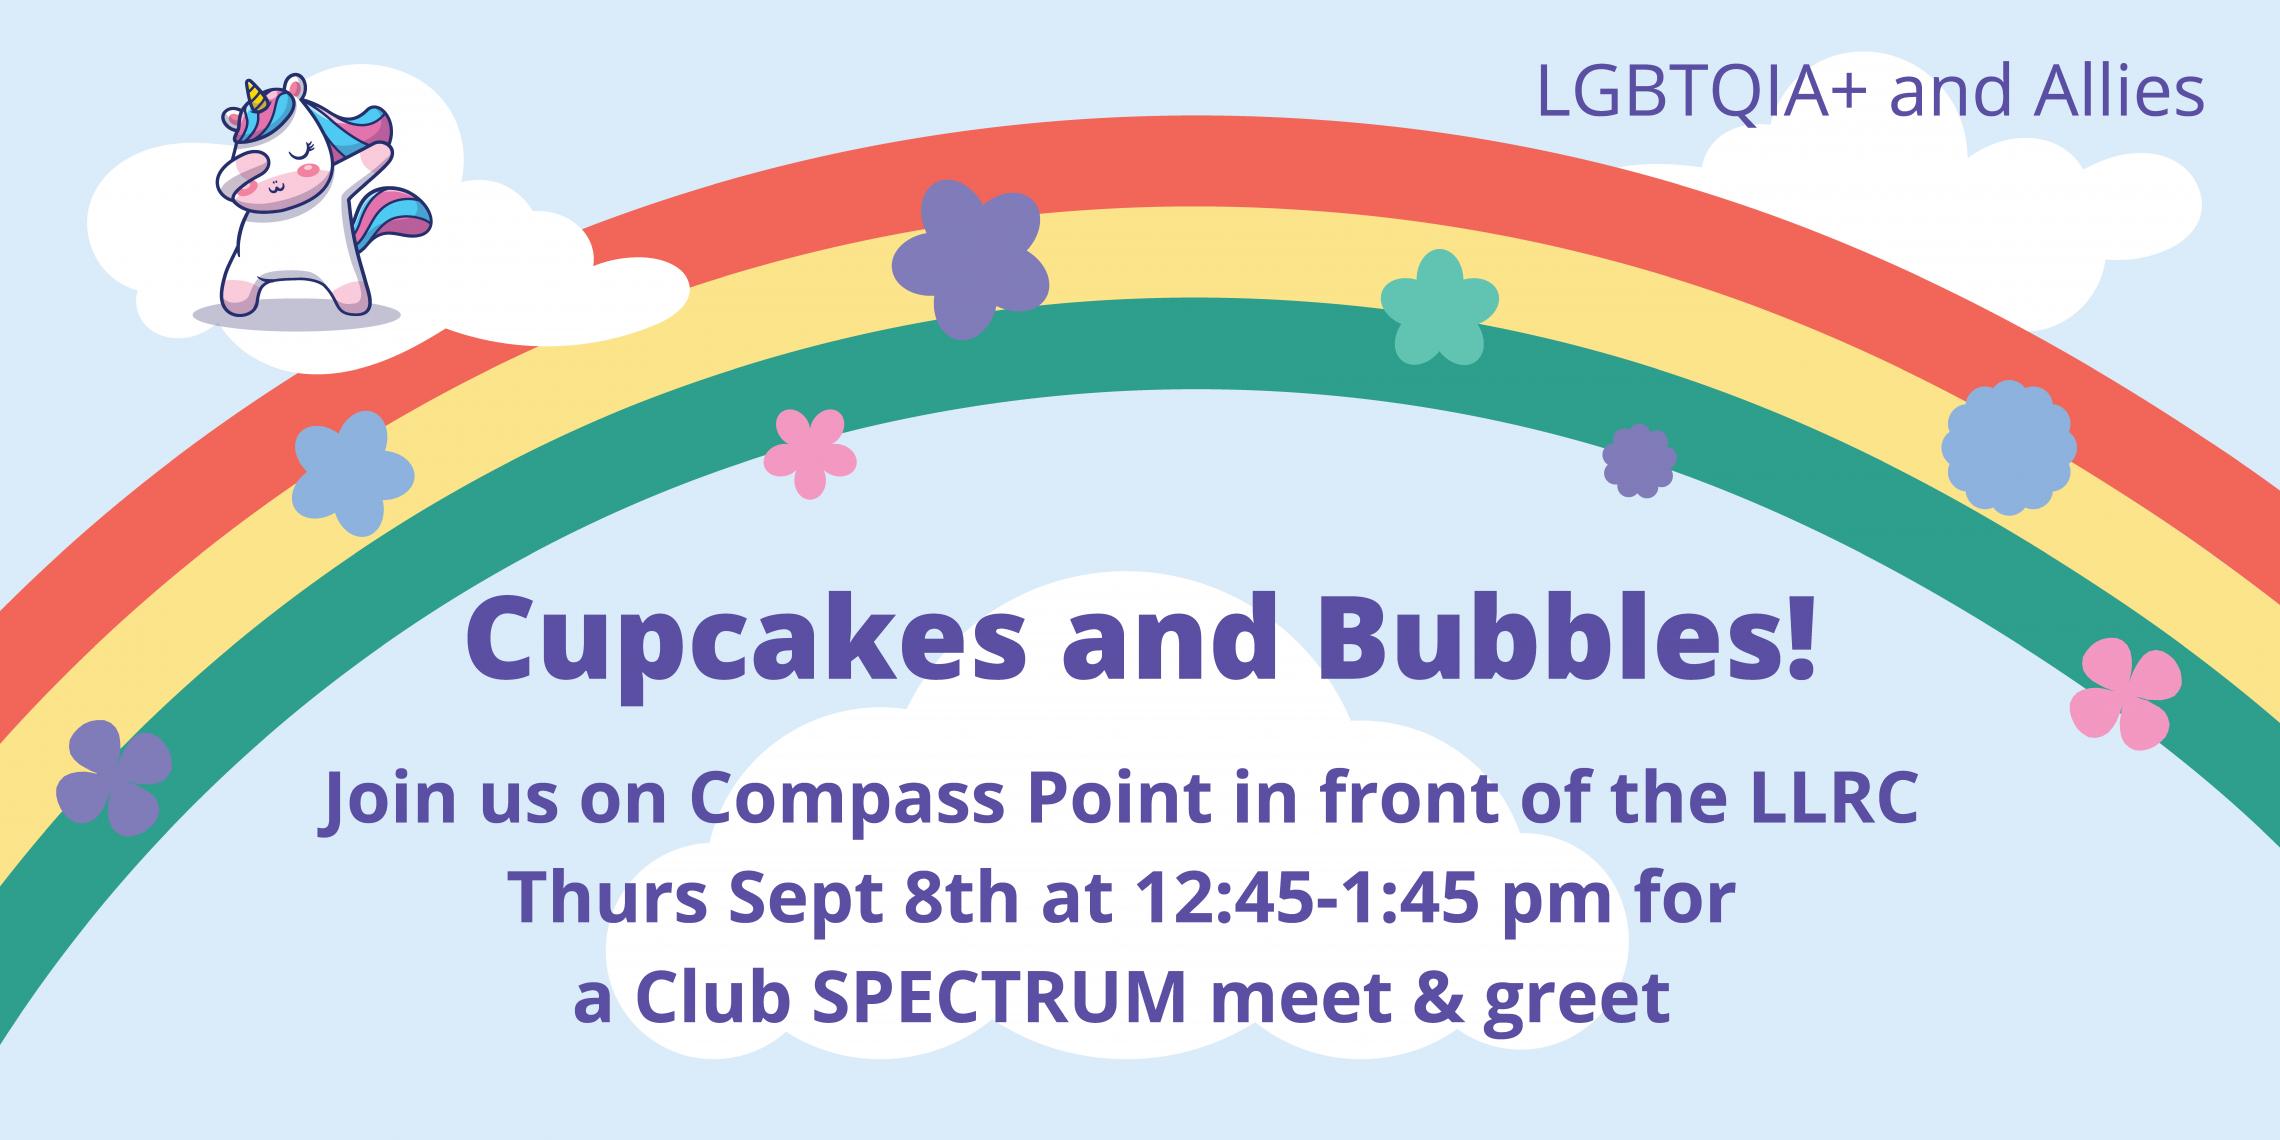 An event announcement graphic. The image contains a rainbow, a unicorn character, flowers, clouds, and text. The text reads, "LGBTQIA+ and Allies. Cupcakes and bubbles! Join us on Compass Point in front of the LLRC building on Thursday, September 8, 2022, from 12:45–1:45 PM for a Club Spectrum meet and greet event.